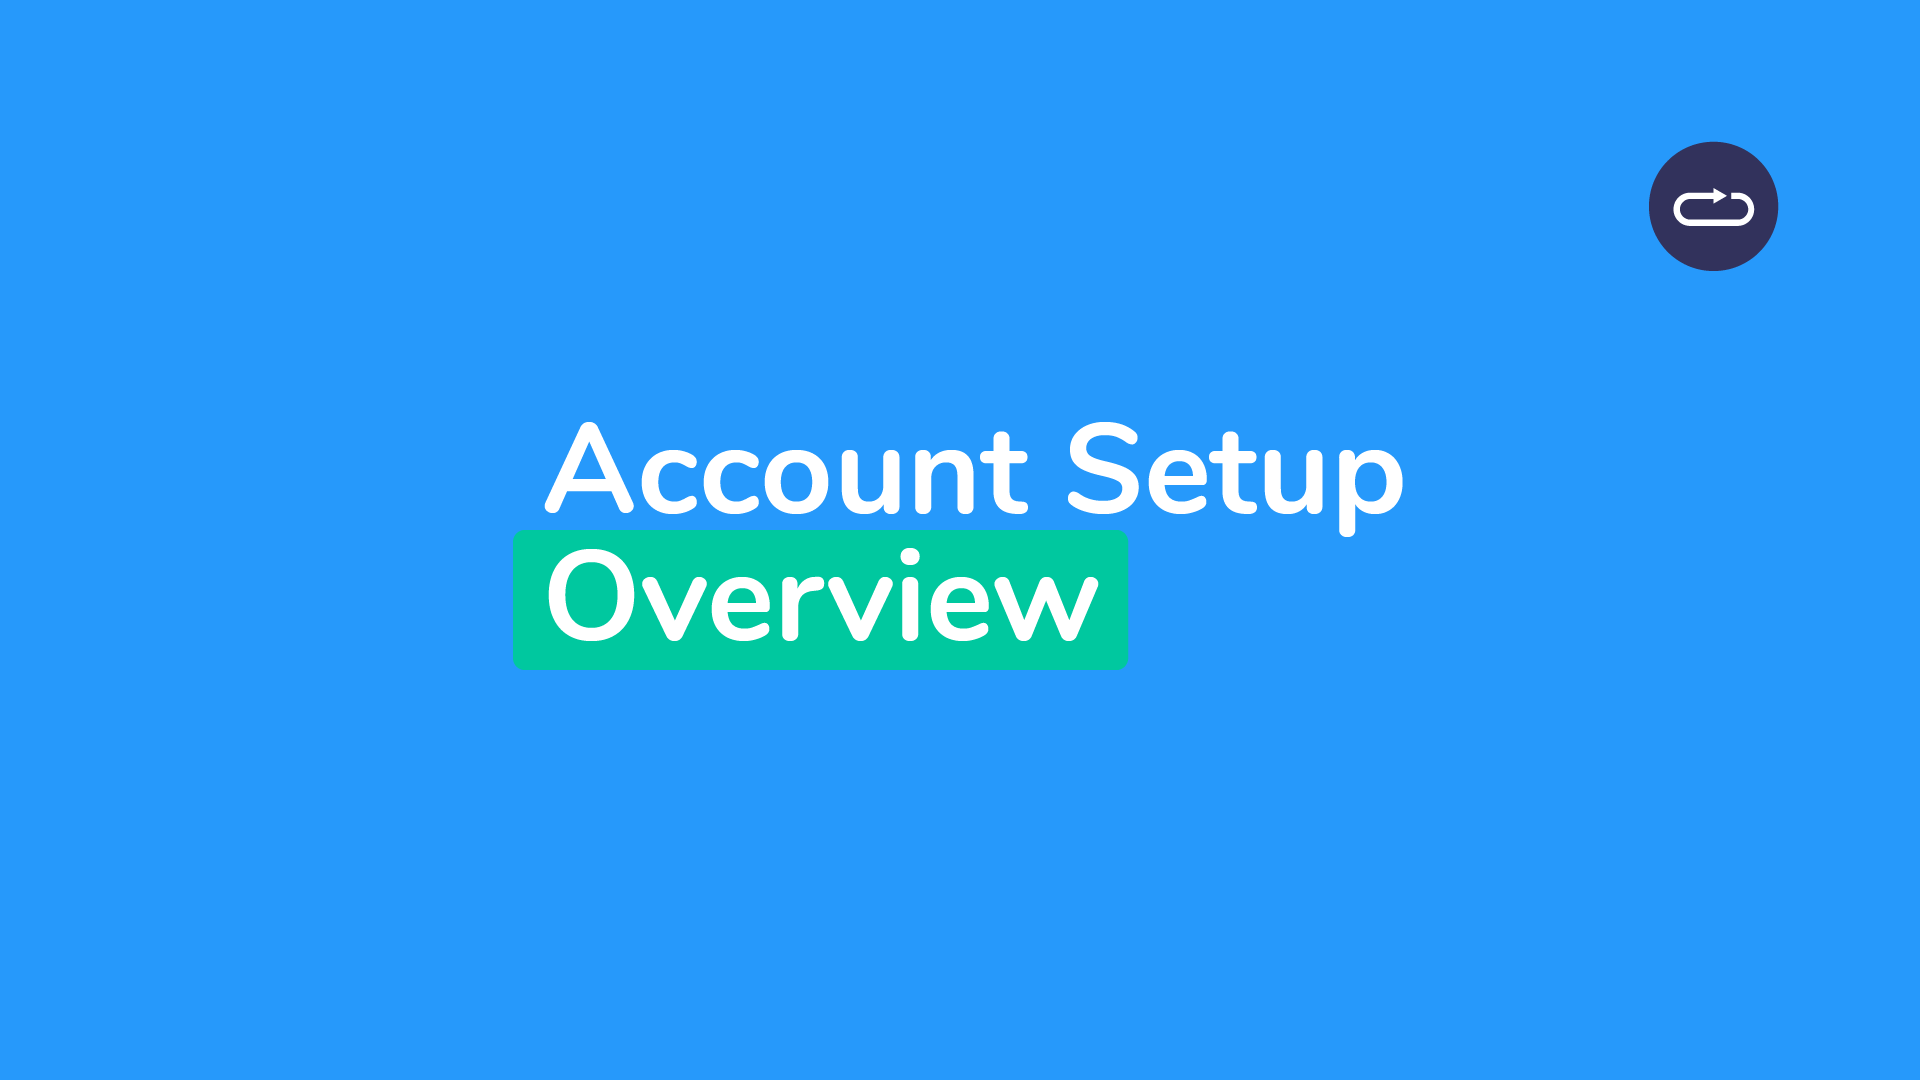 Account Setup Overview